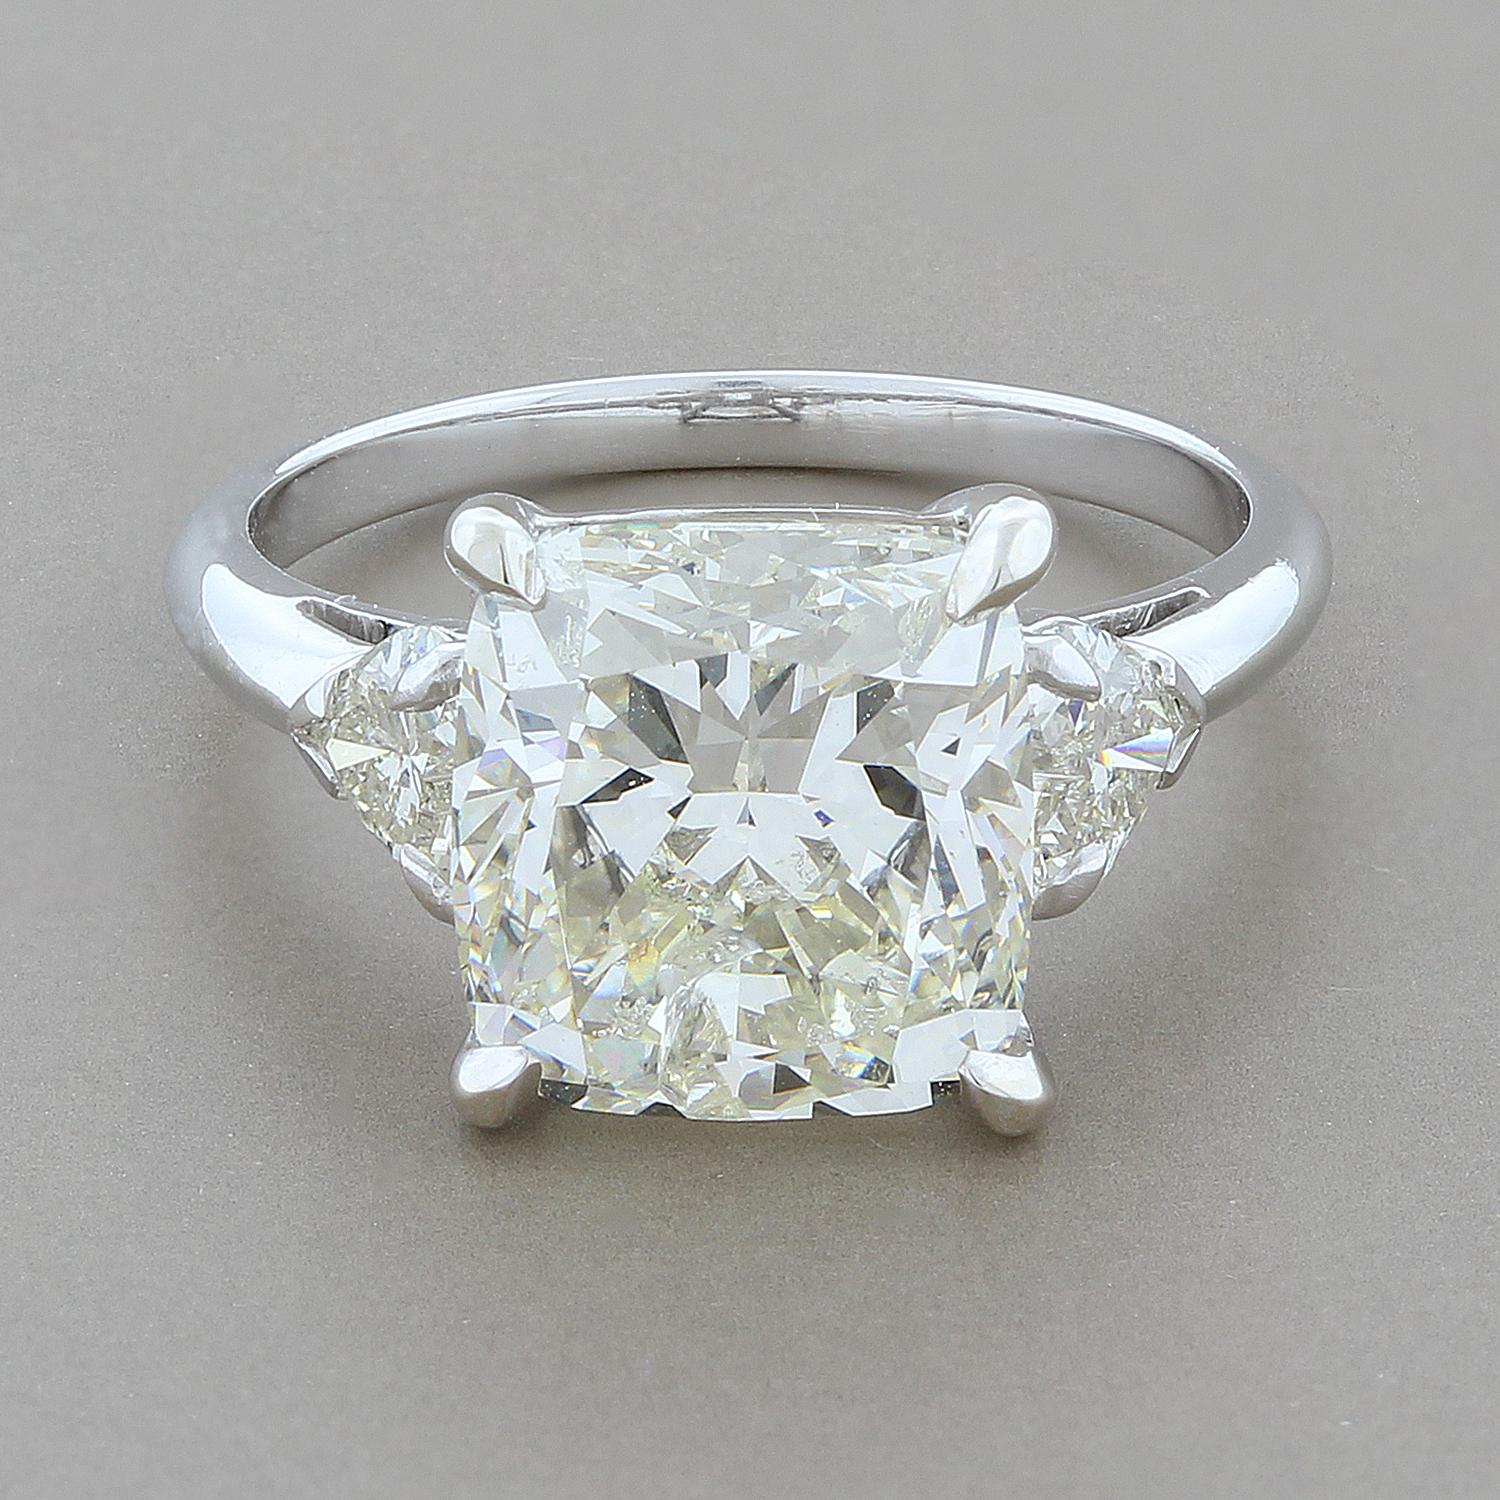 A beautifully cut 5.05 carat cushion cut diamond with brilliance and fire that will match any other diamond on the market. Two heart shape diamonds are mounted on the sides of the cushion cut, set in 18K white gold. 
A bargain of a price, all the